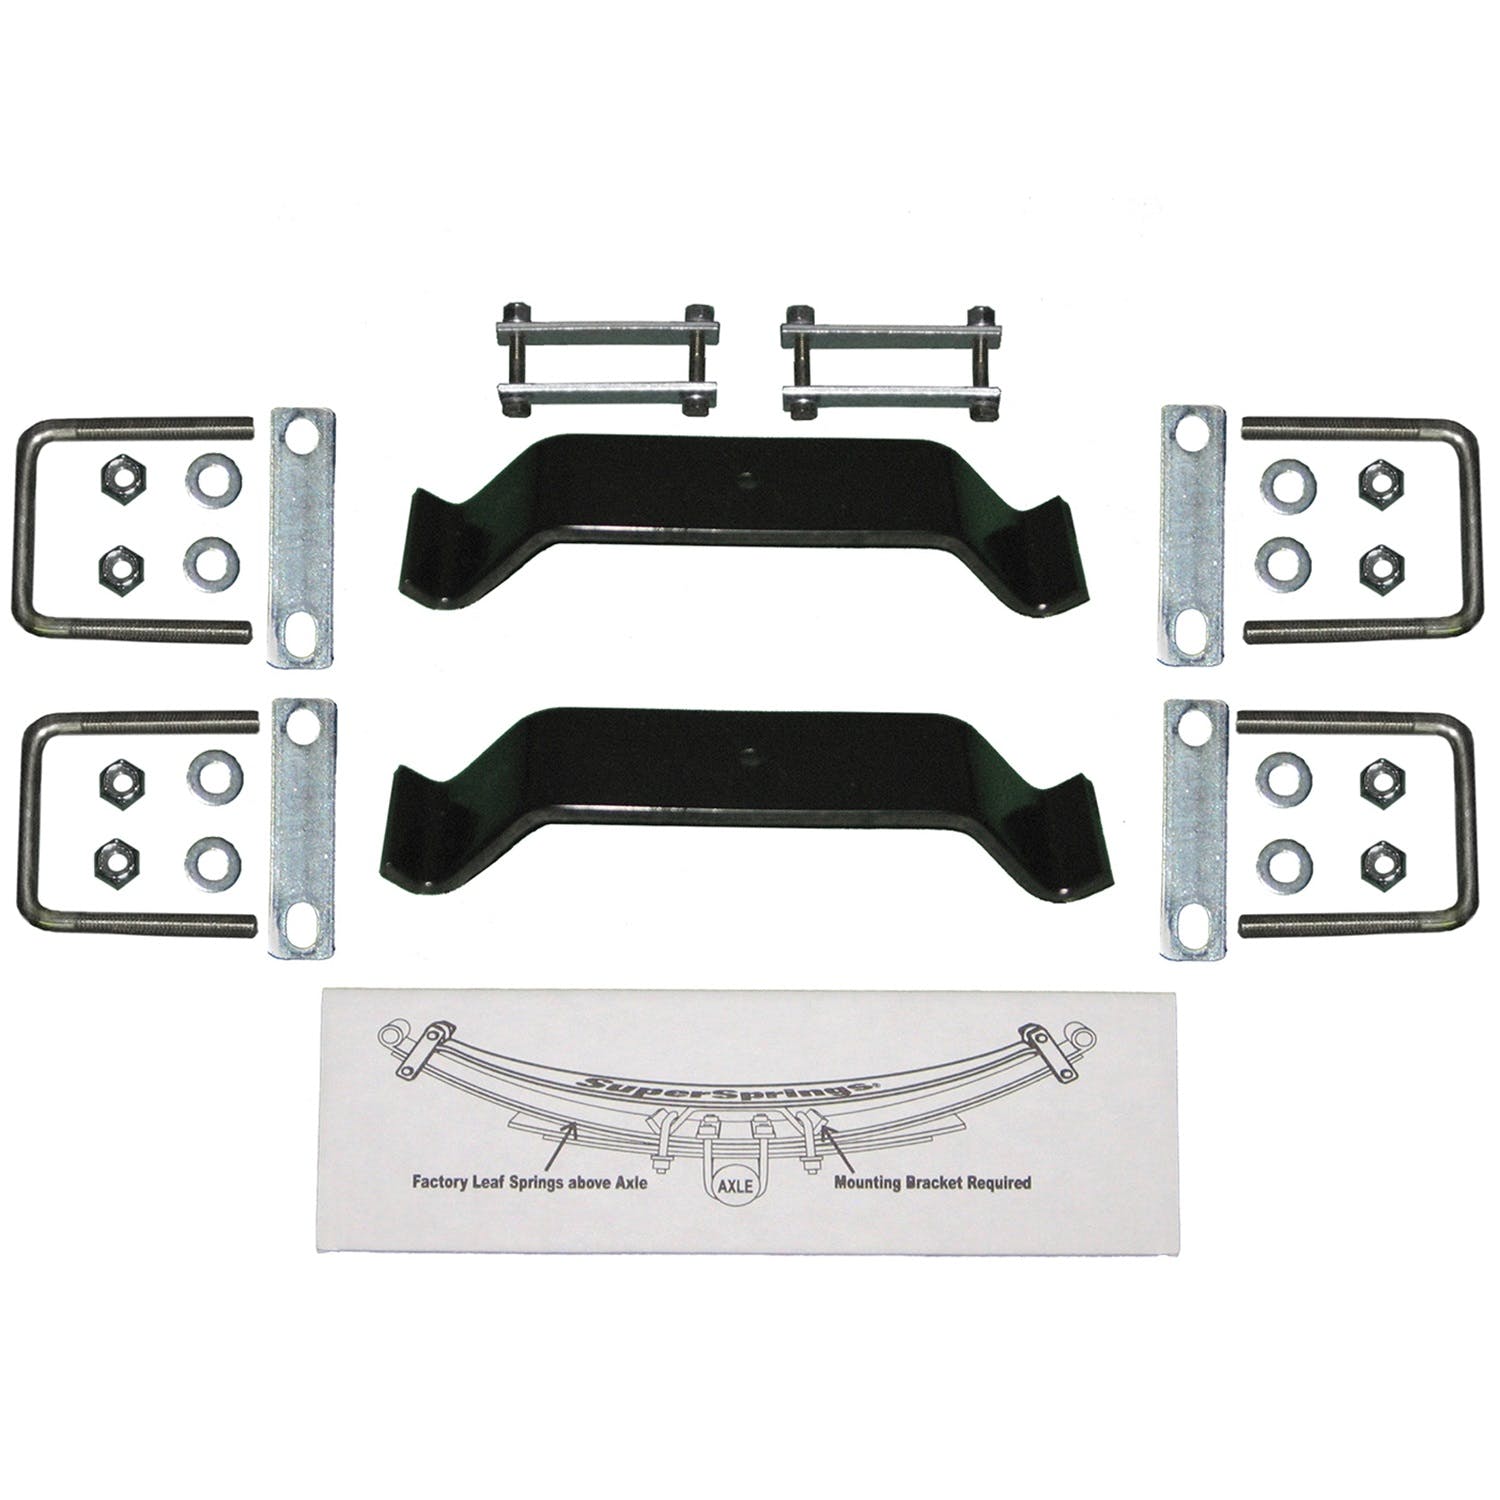 SuperSprings MTKT Mounting Kit used for specified SuperSprings applications